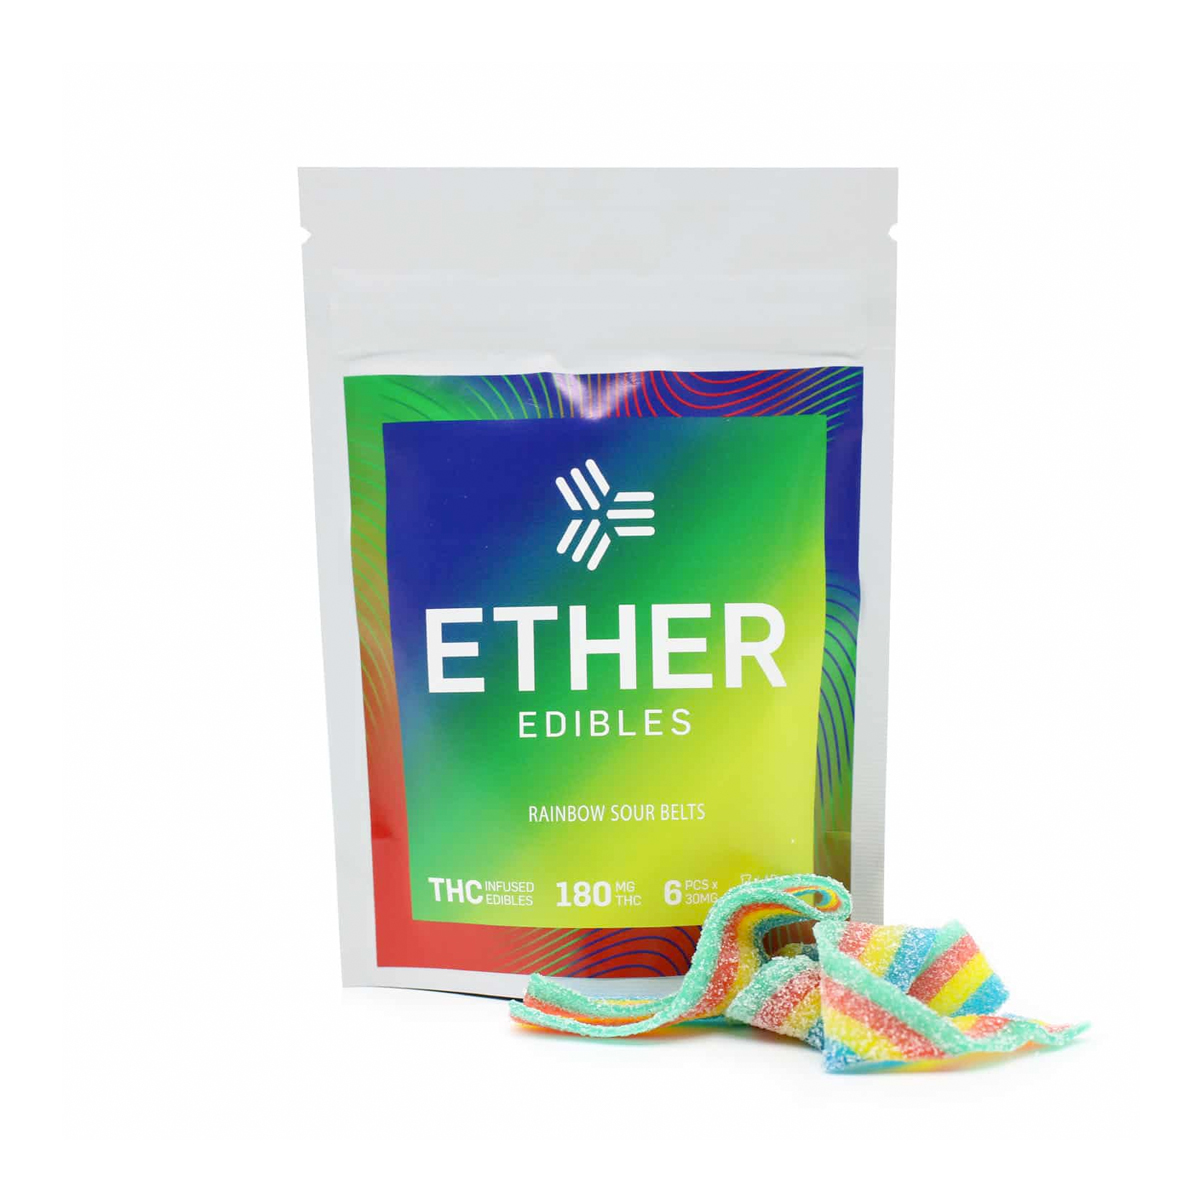 Buy Ether Edibles Rainbow Sour Belts - 180mg Online